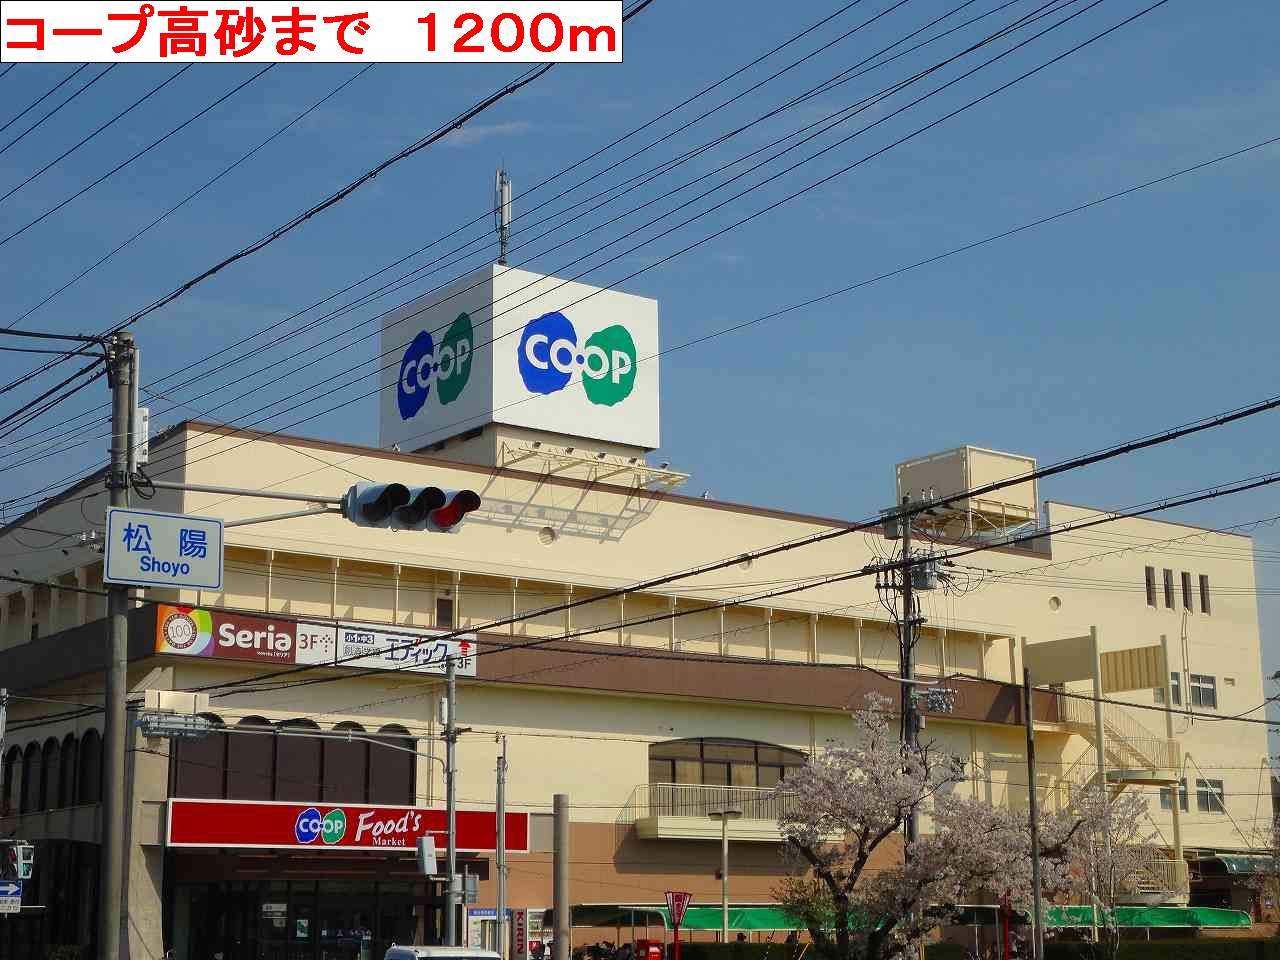 Shopping centre. 1200m to Cope Takasago (shopping center)